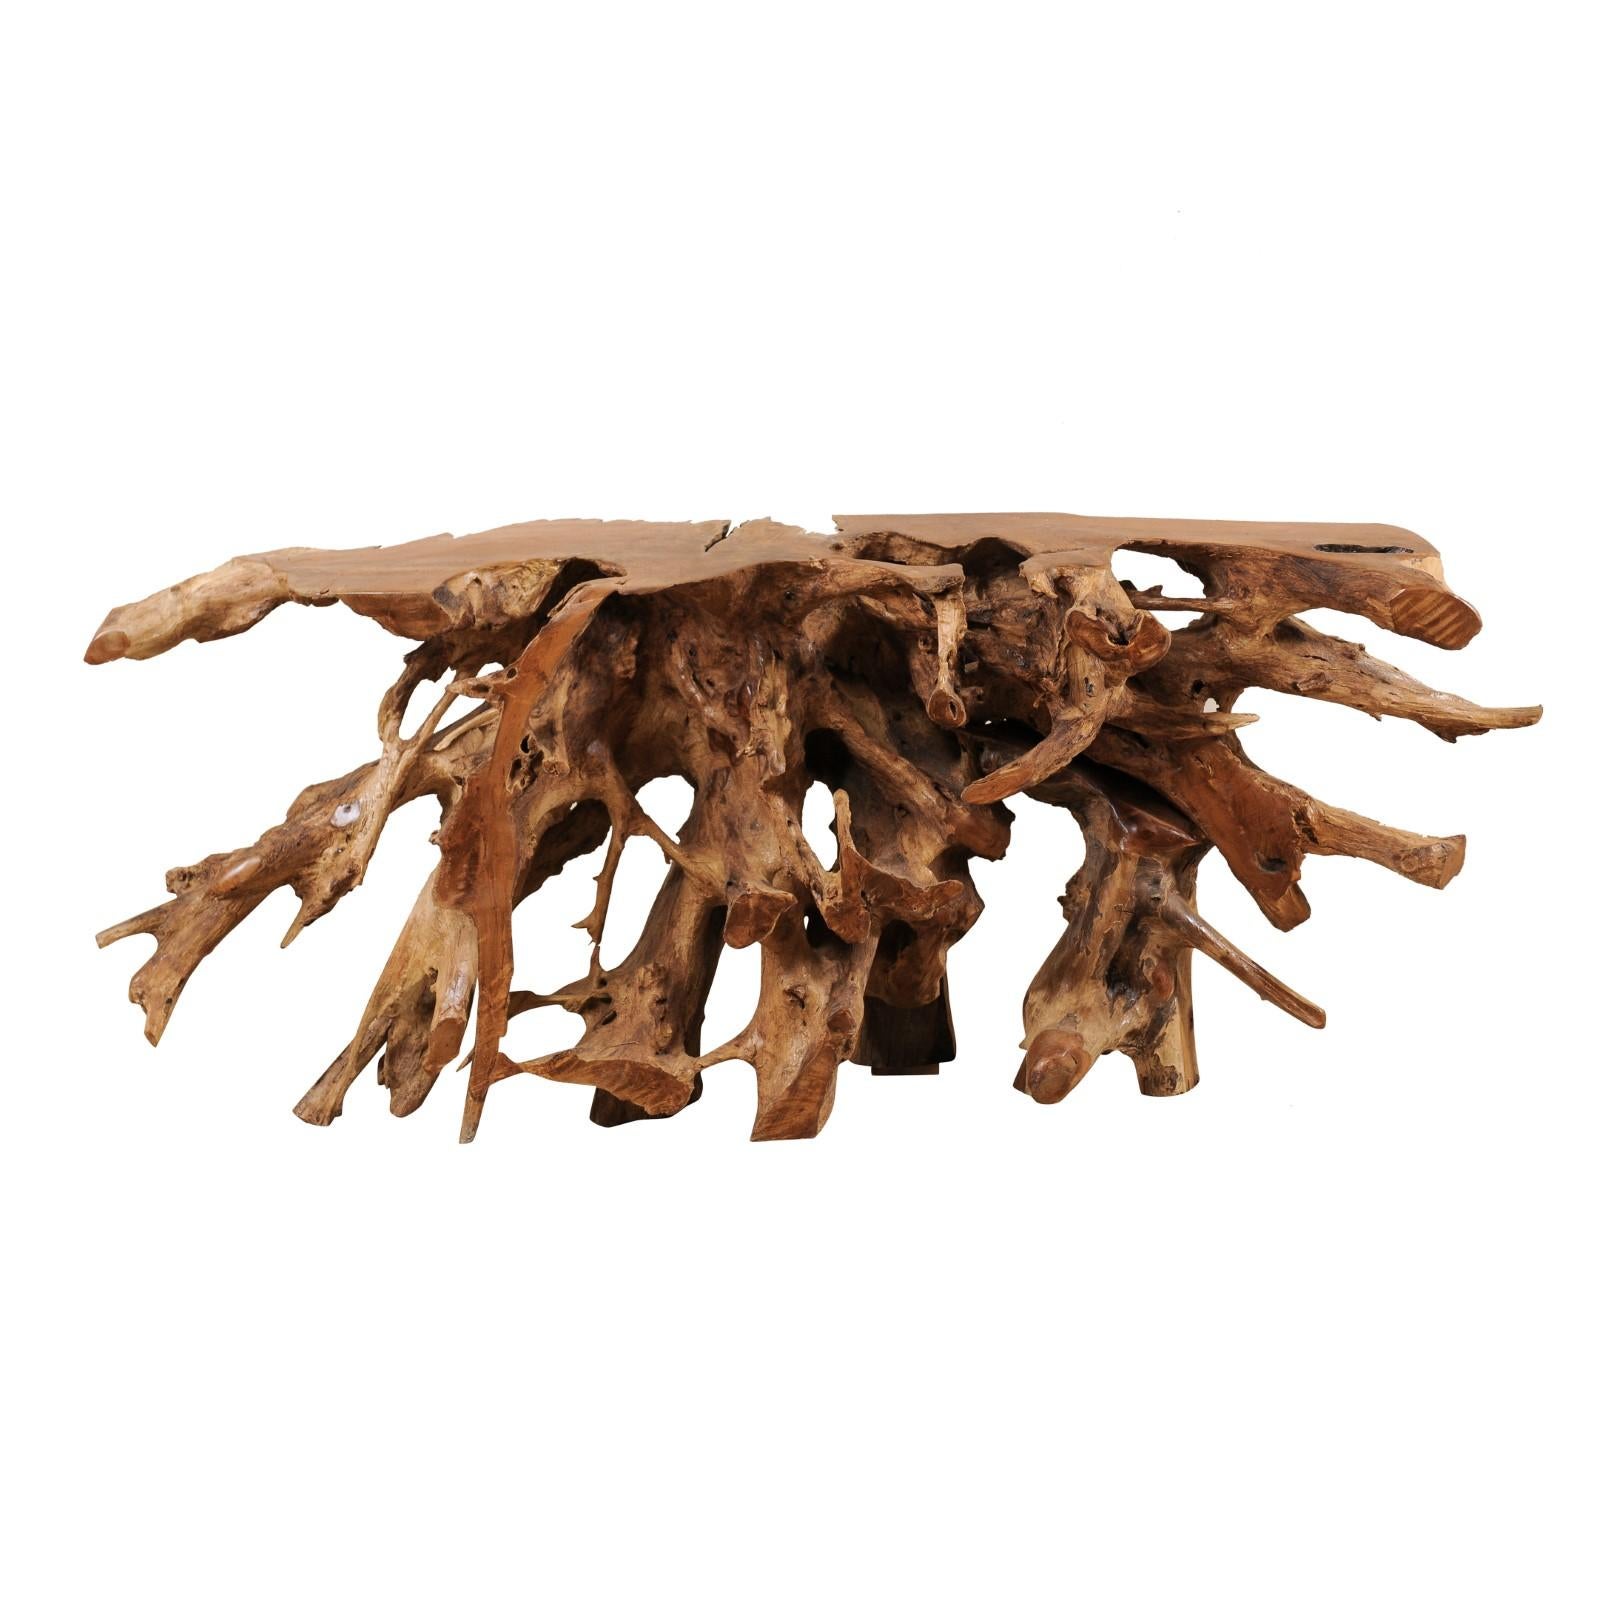 A 6+ Ft Long Natural Teak Root Console Table- An Art Piece by Mother Nature!